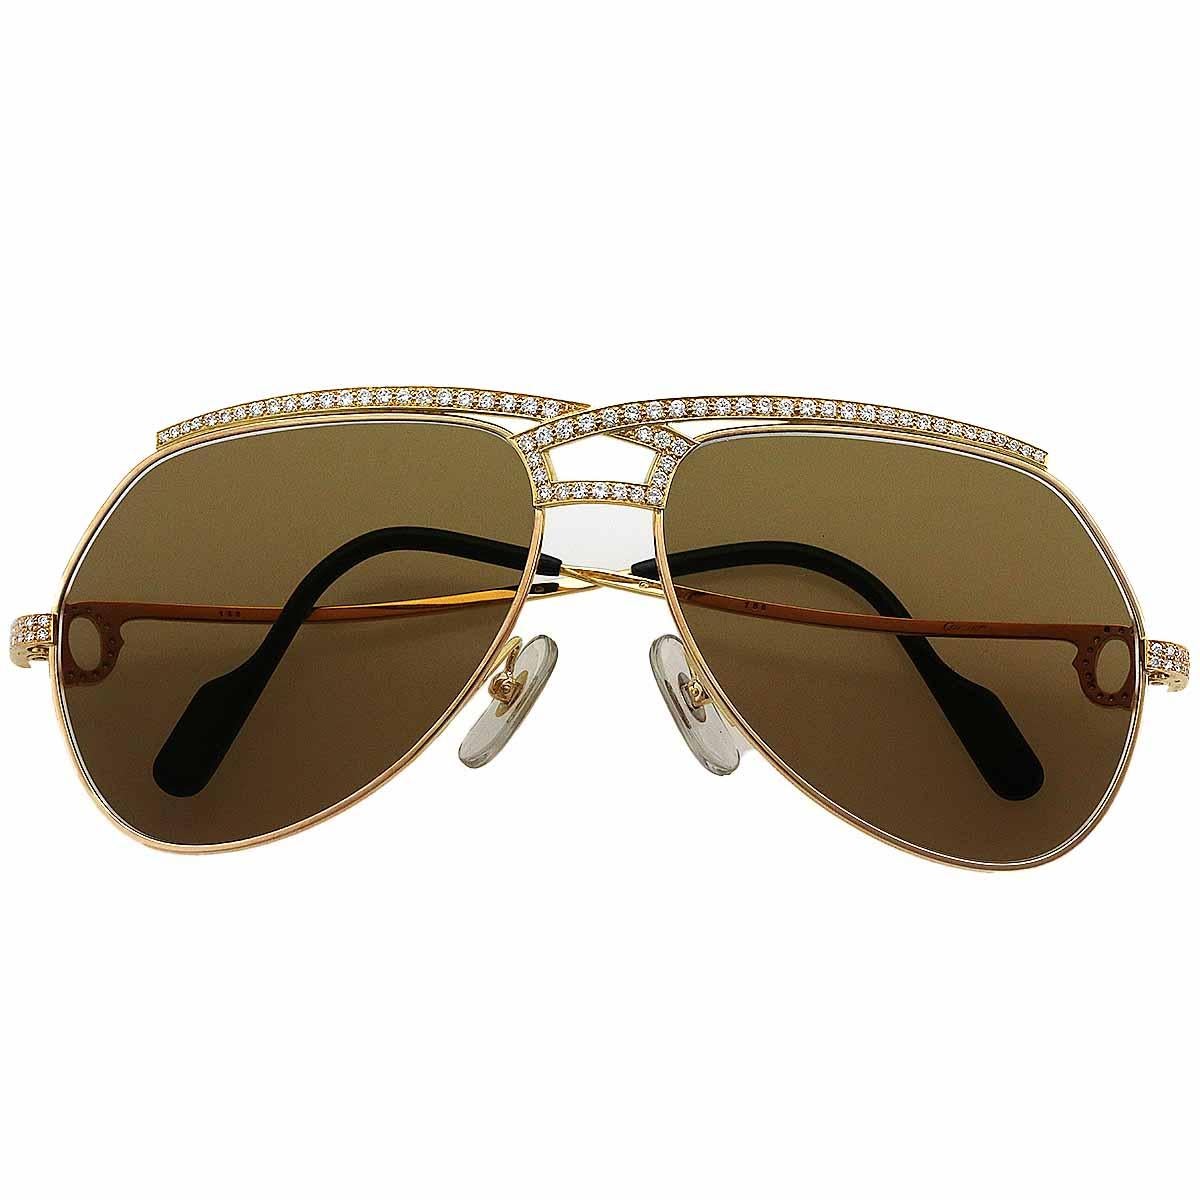 Brand:Cartier
Name:Vendome Papillon 130 59-14 Eyewear
Material:Diamonds, 750 K18 YG yellow gold
Size:H50mm×W56mm / H1.96in×W2.20in（Approx)
Color:Gold×Brown
Comes with:Cartier case, pouch x 2, / Cartier repair certificate (June 2021)